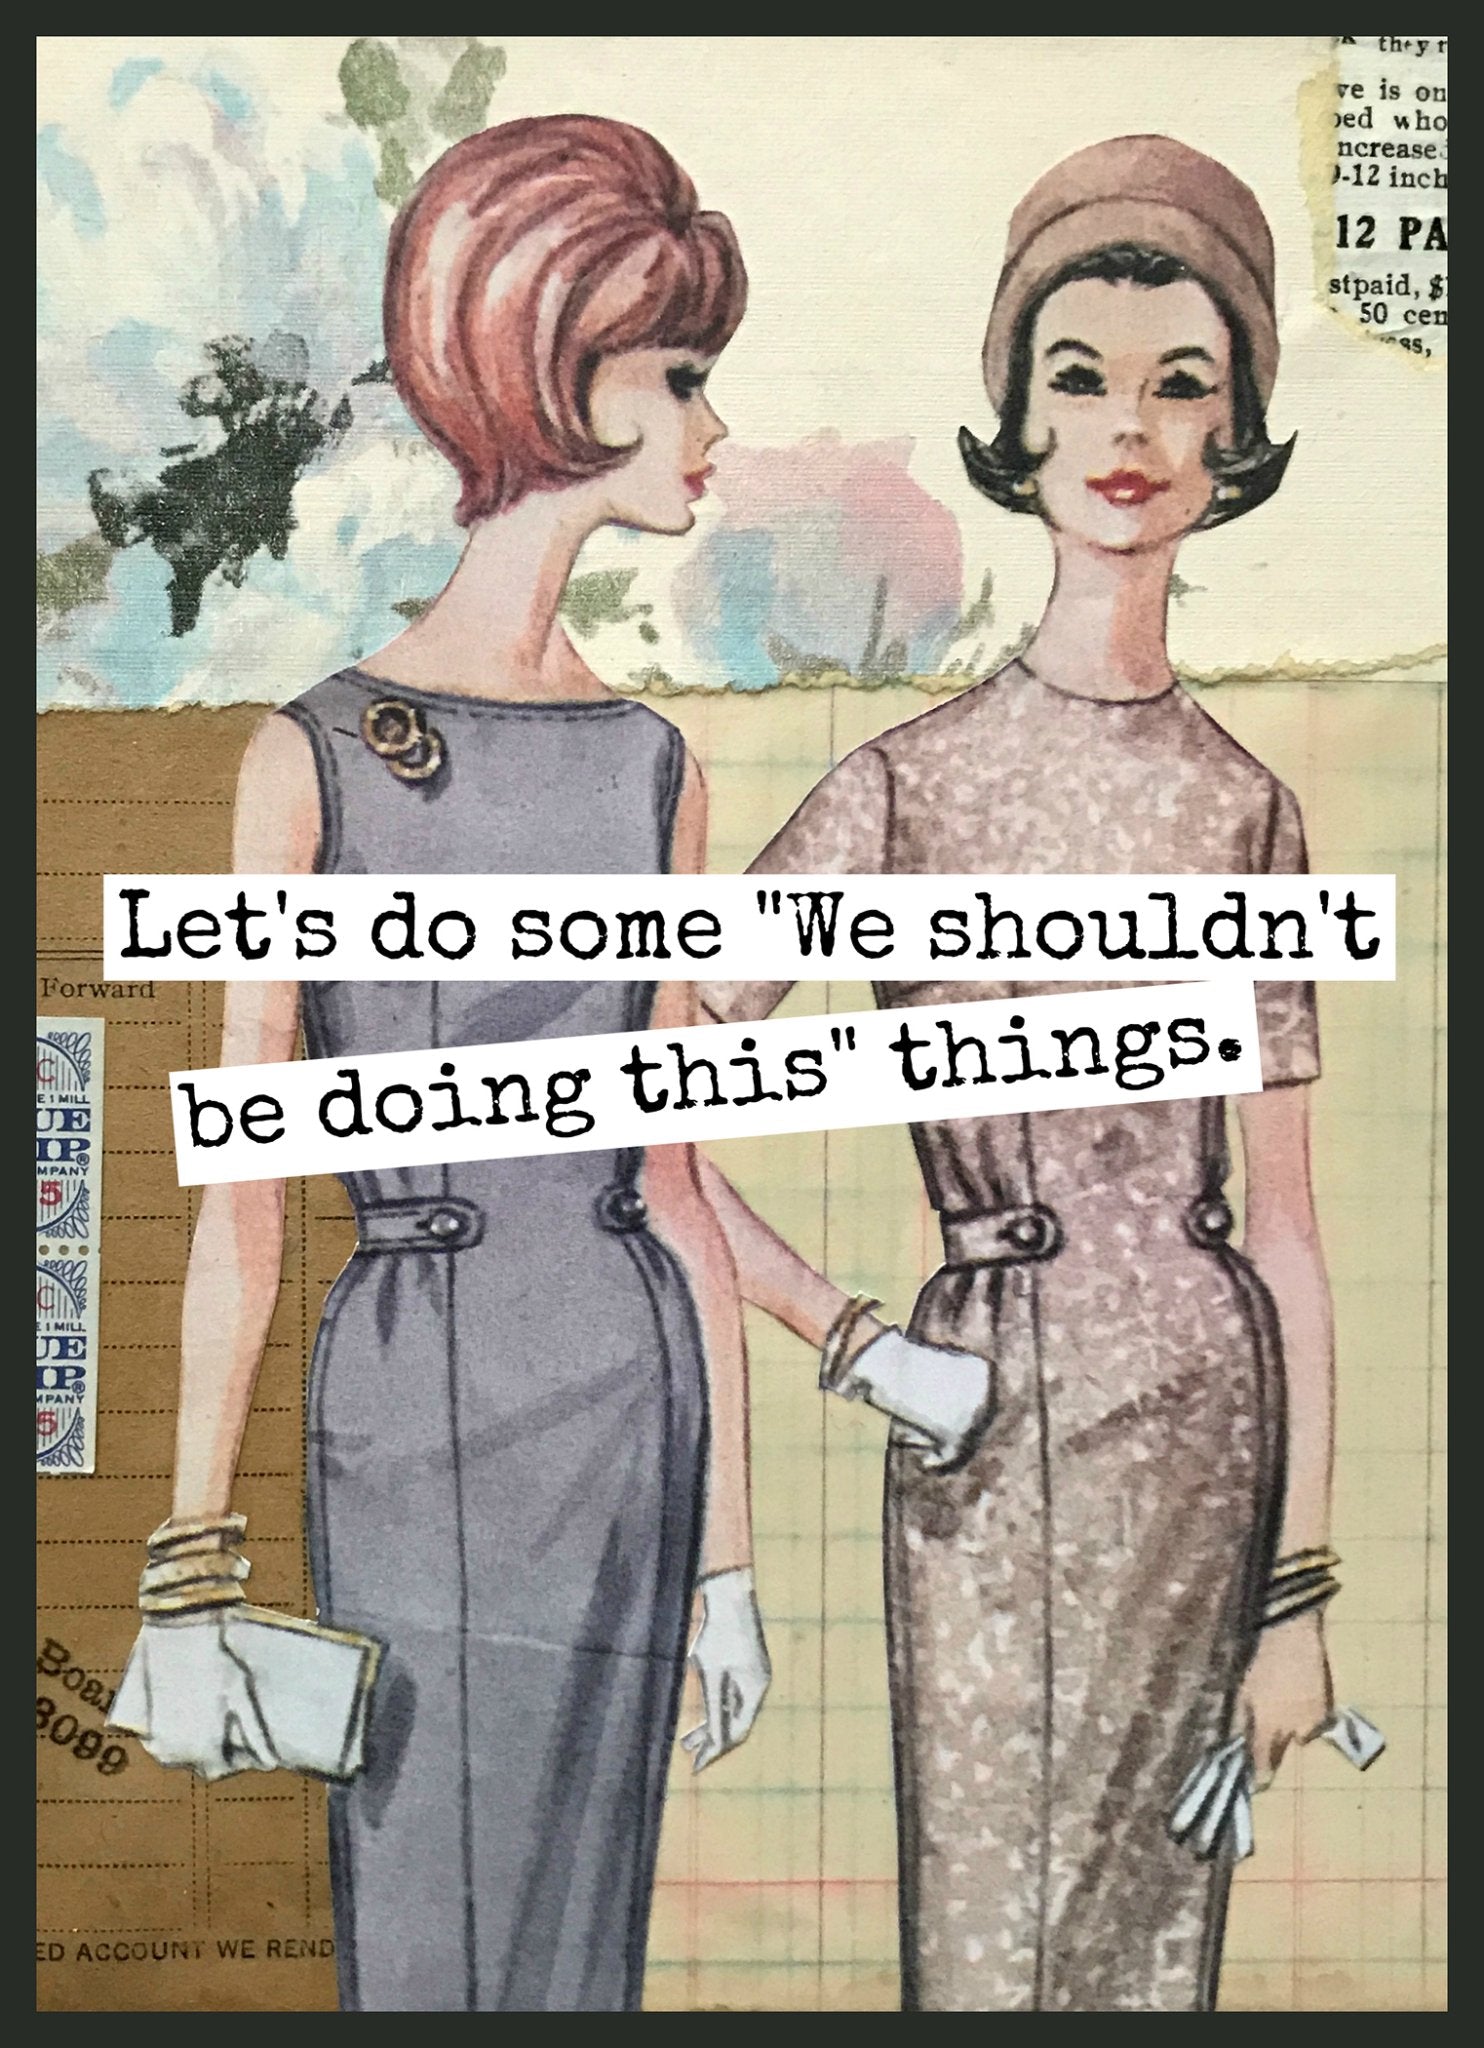 Funny Greeting Card. "We Shouldn't Be Doing" Things. - My Filosophy